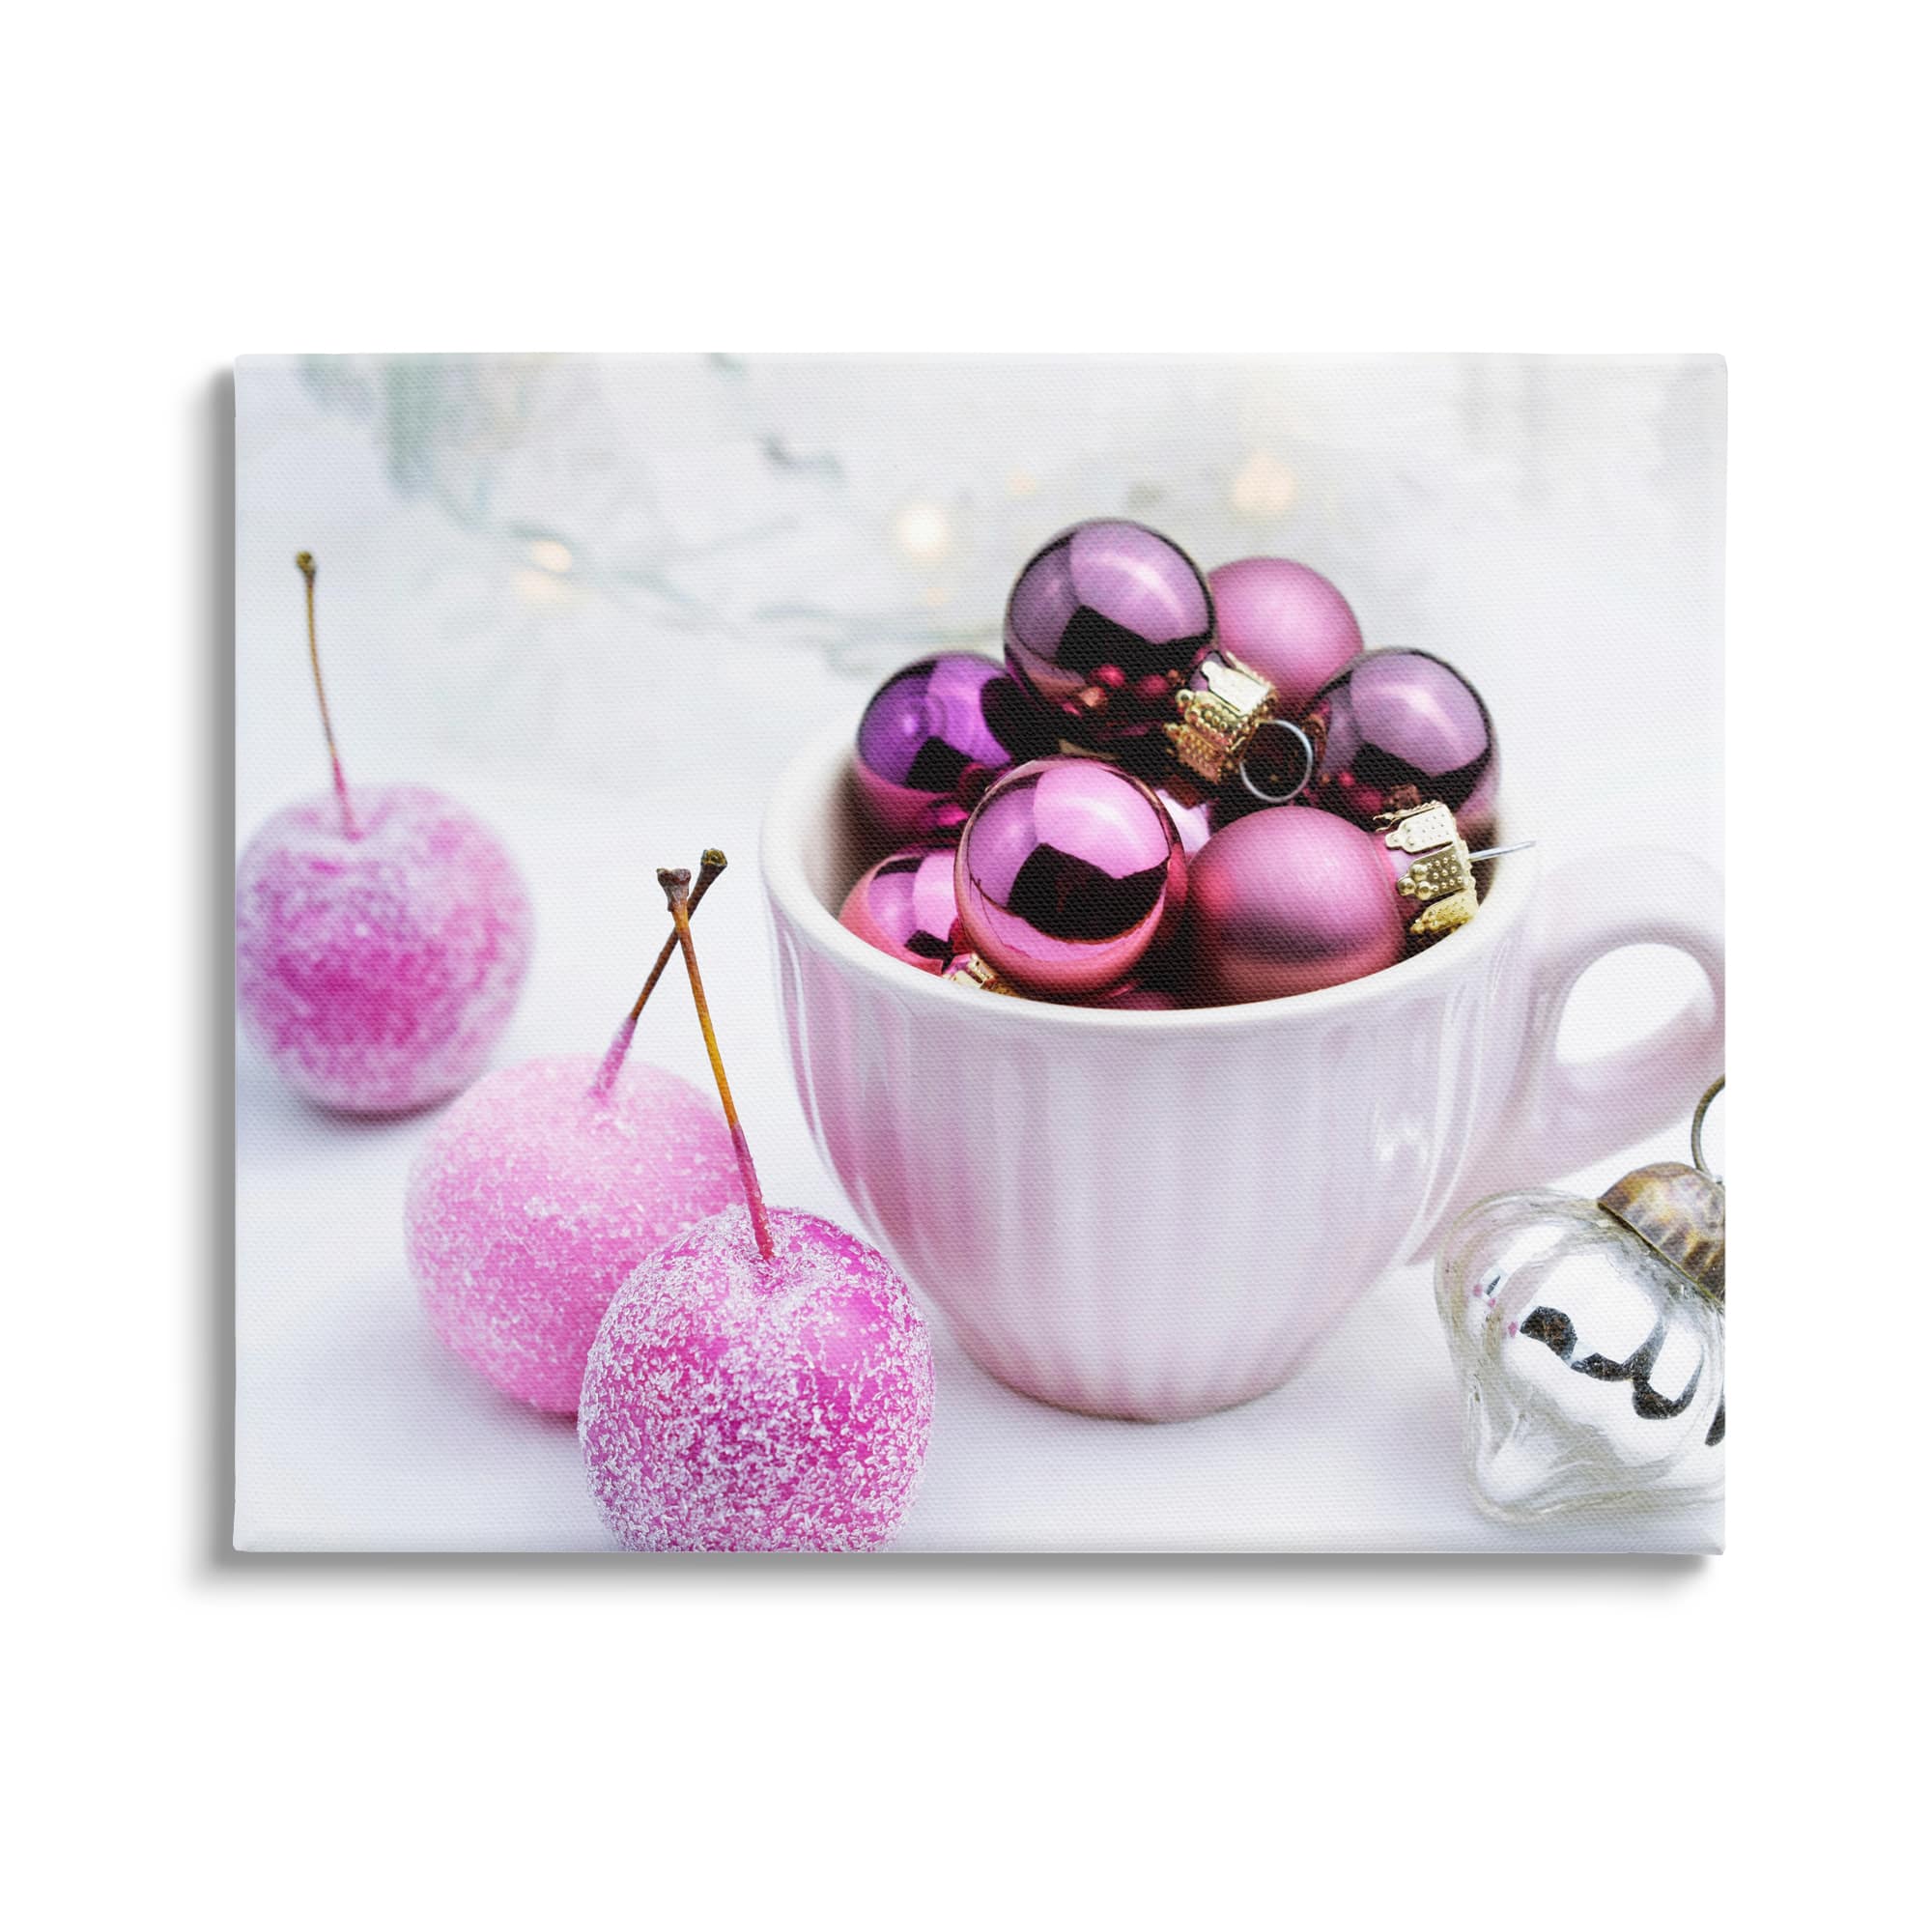 Stupell Industries Glimmering Pink Christmas Ornaments Canvas Wall Art